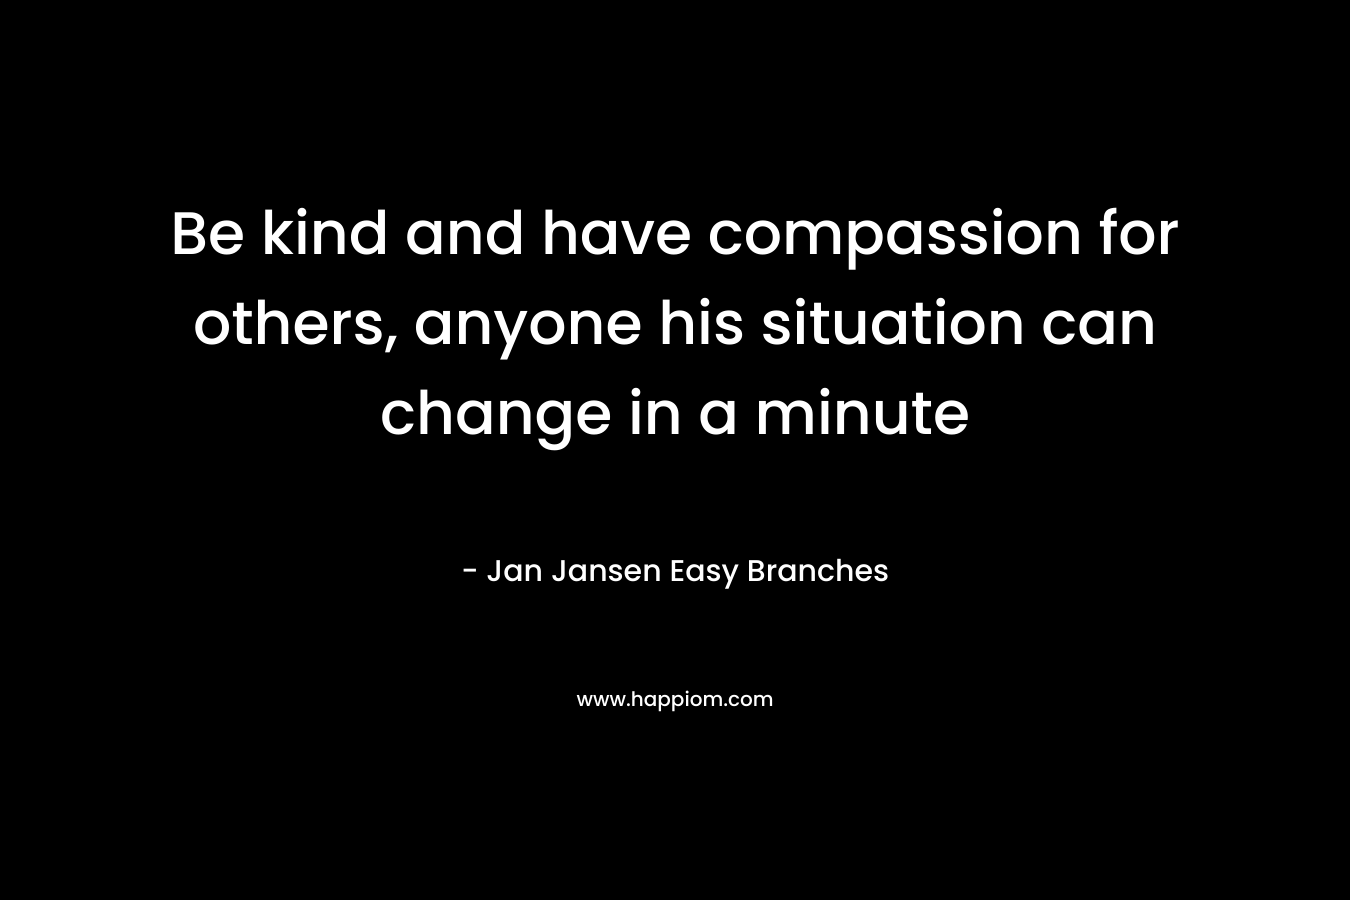 Be kind and have compassion for others, anyone his situation can change in a minute